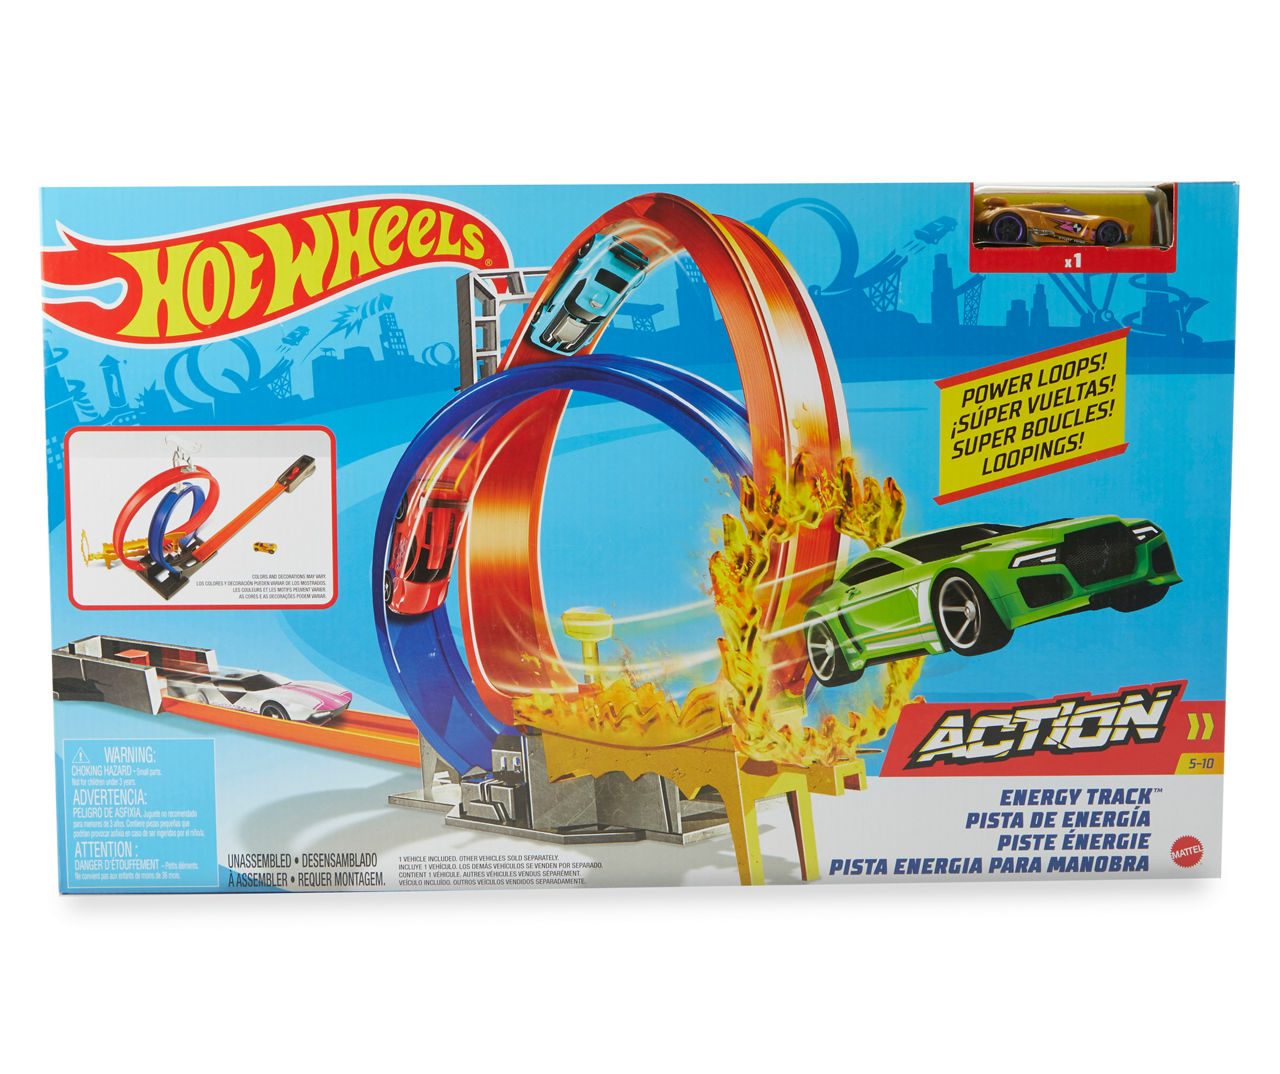 New Hot Wheels Action Energy Track Set Toy Playset With Car Mattel #GND92 Loops 